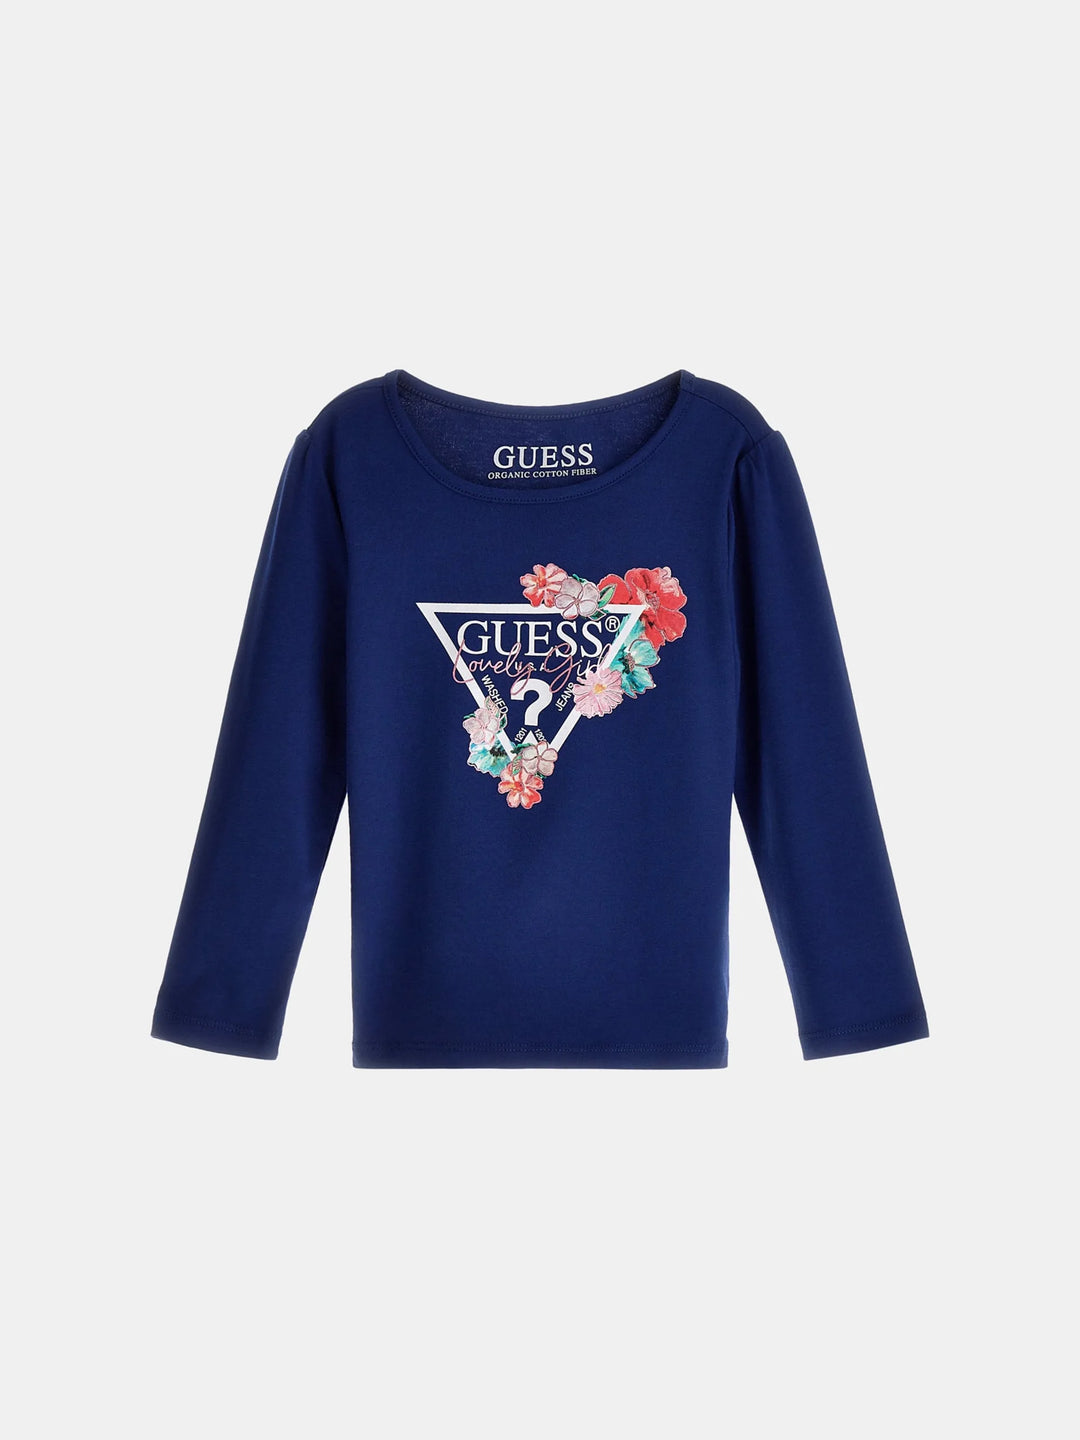 TODDLER GIRL - FRONT TRIANGLE LOGO T-SHIRT